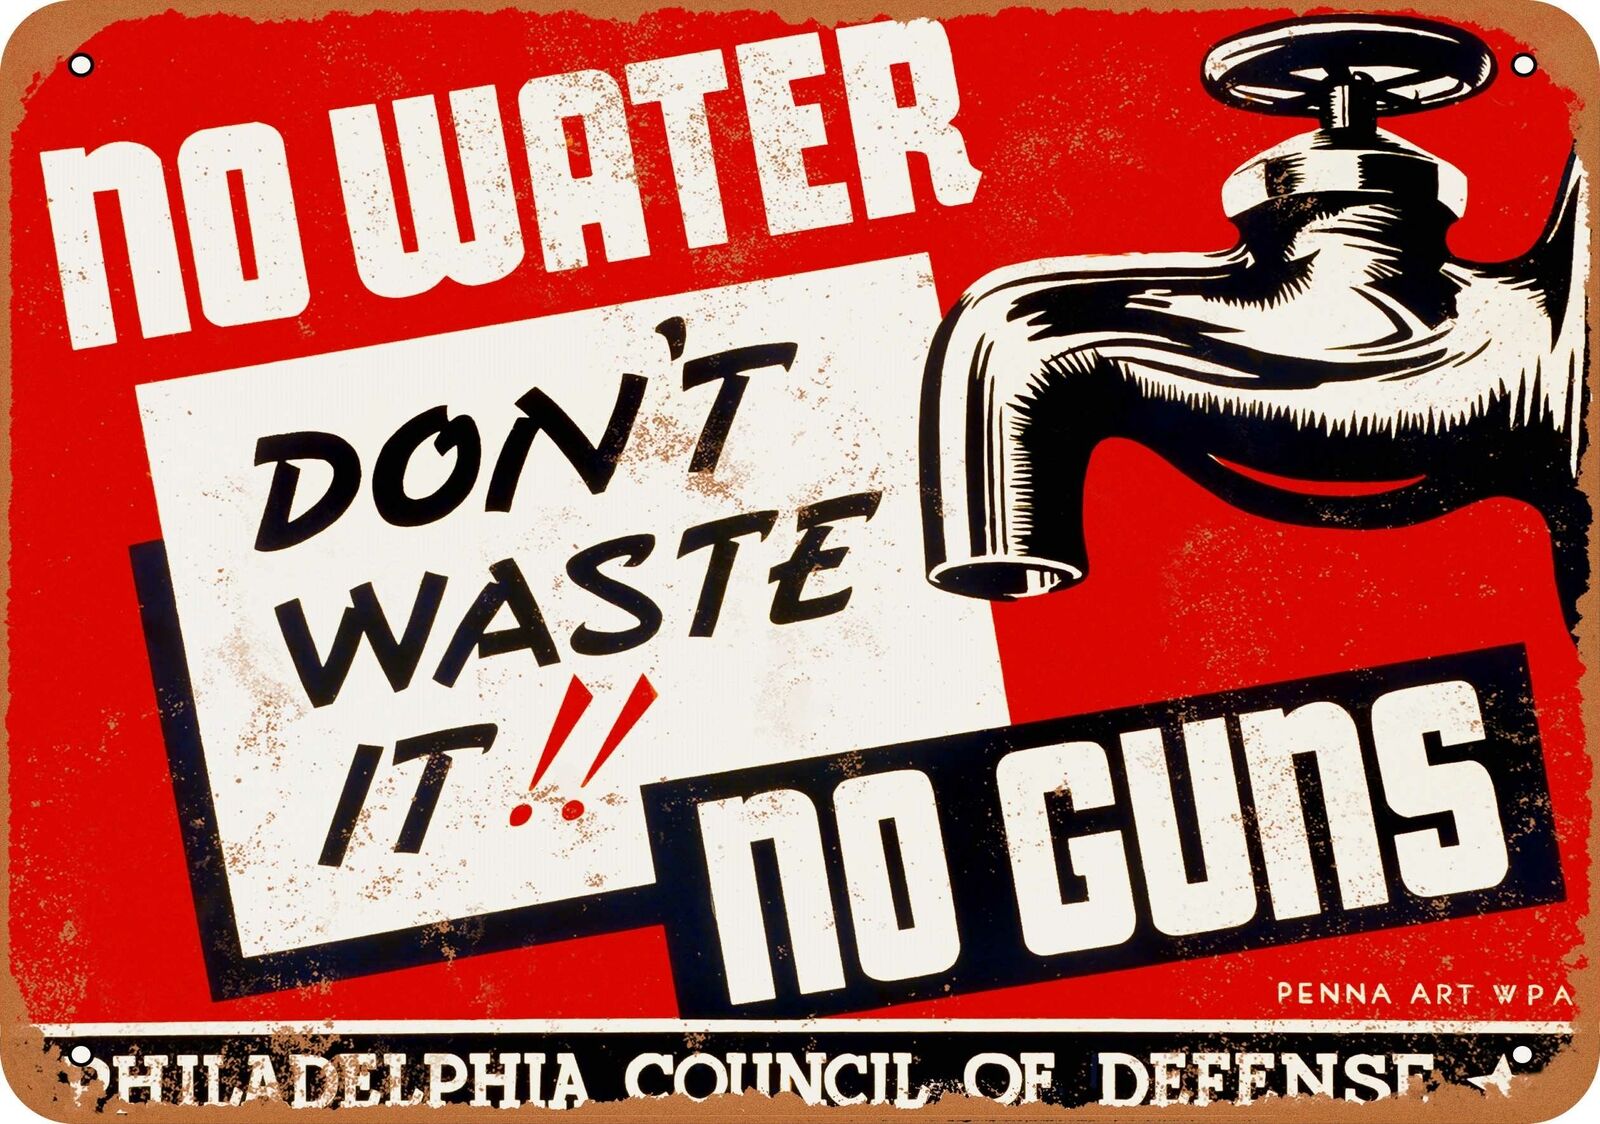 Metal Sign - 1941 Don't Waste Philly Water or No Guns -- Vintage Look